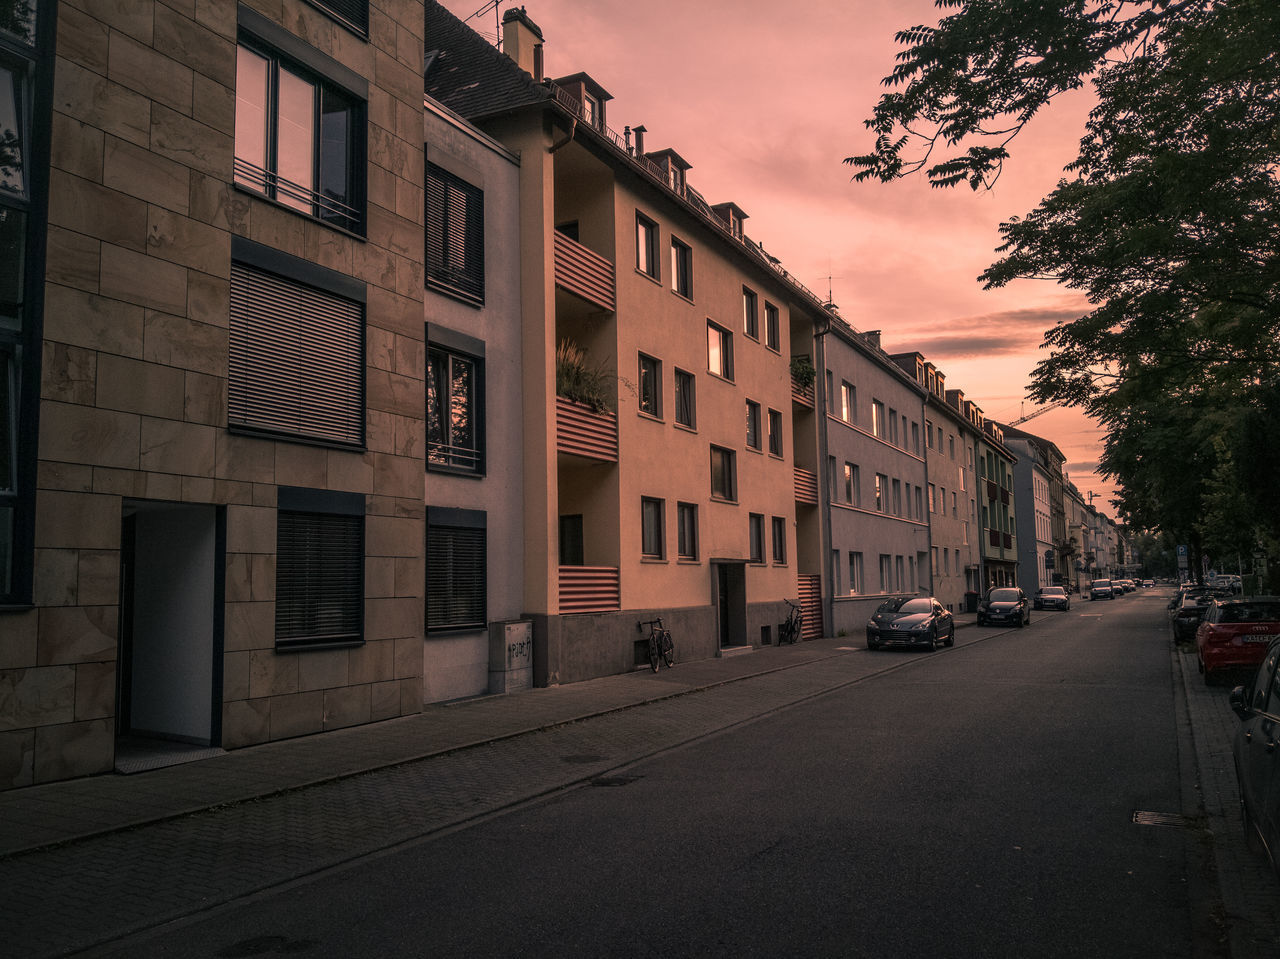 ROAD BY BUILDINGS AGAINST SKY AT SUNSET